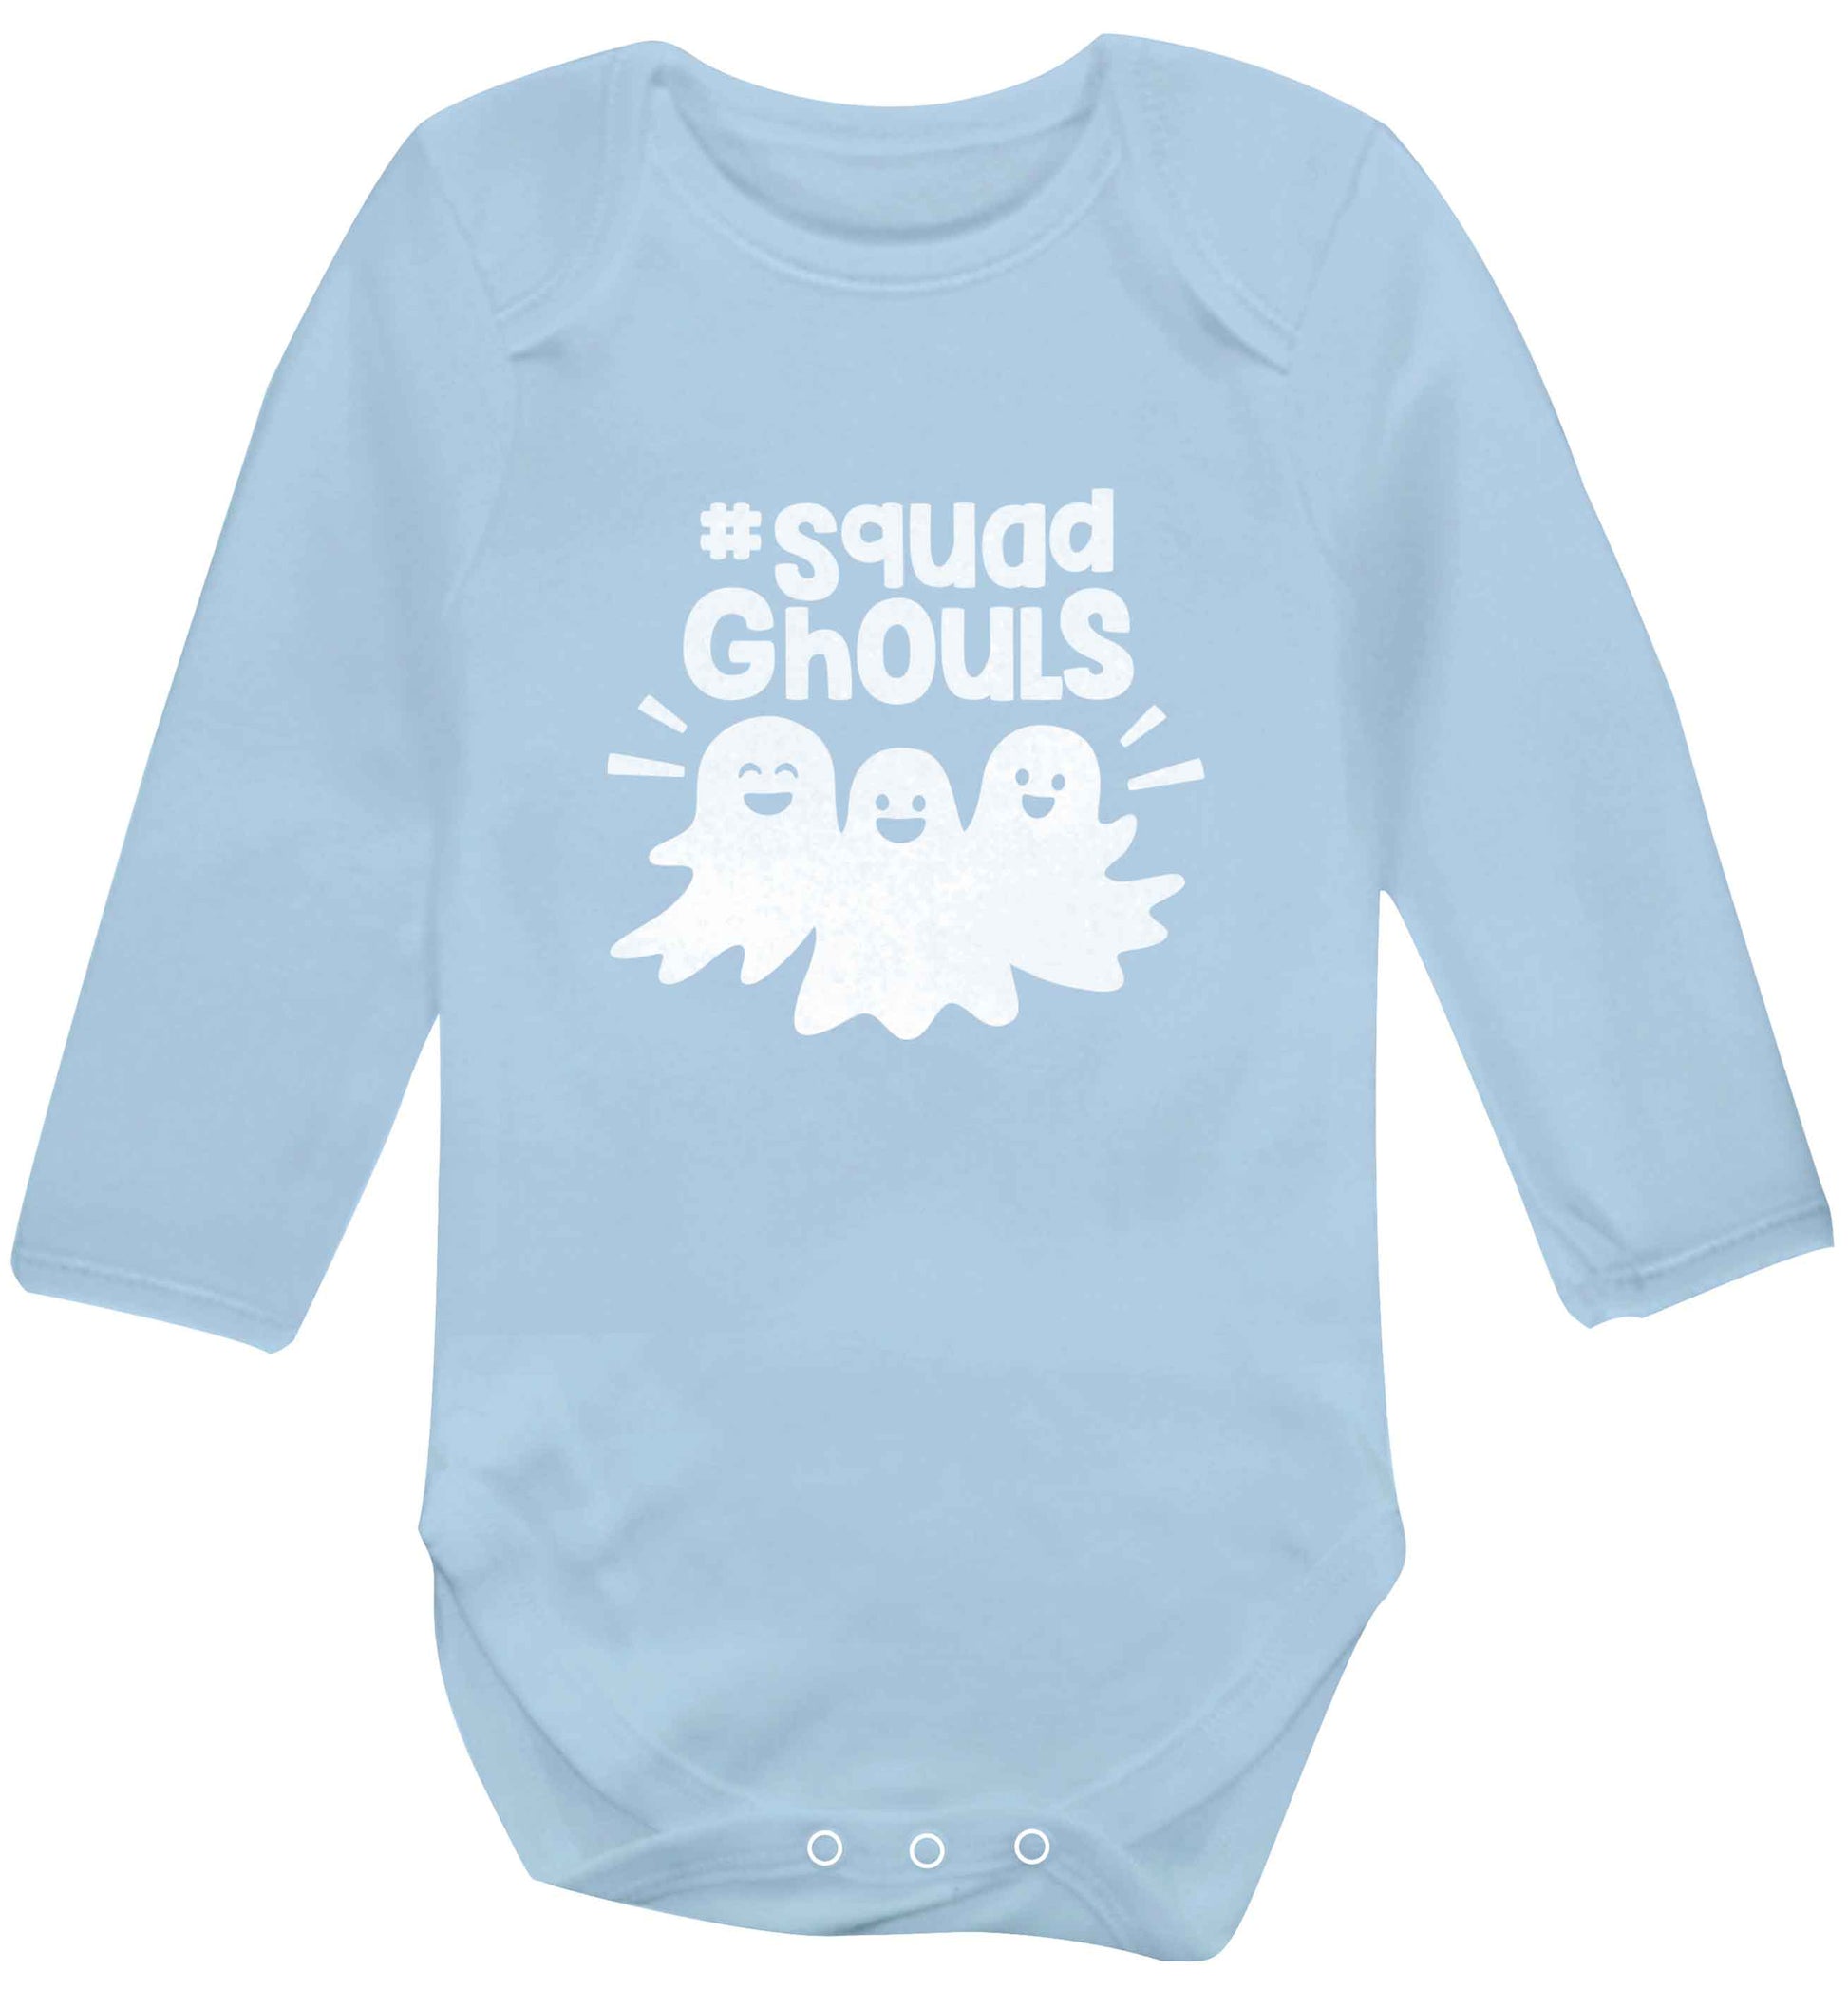 Squad ghouls Kit baby vest long sleeved pale blue 6-12 months